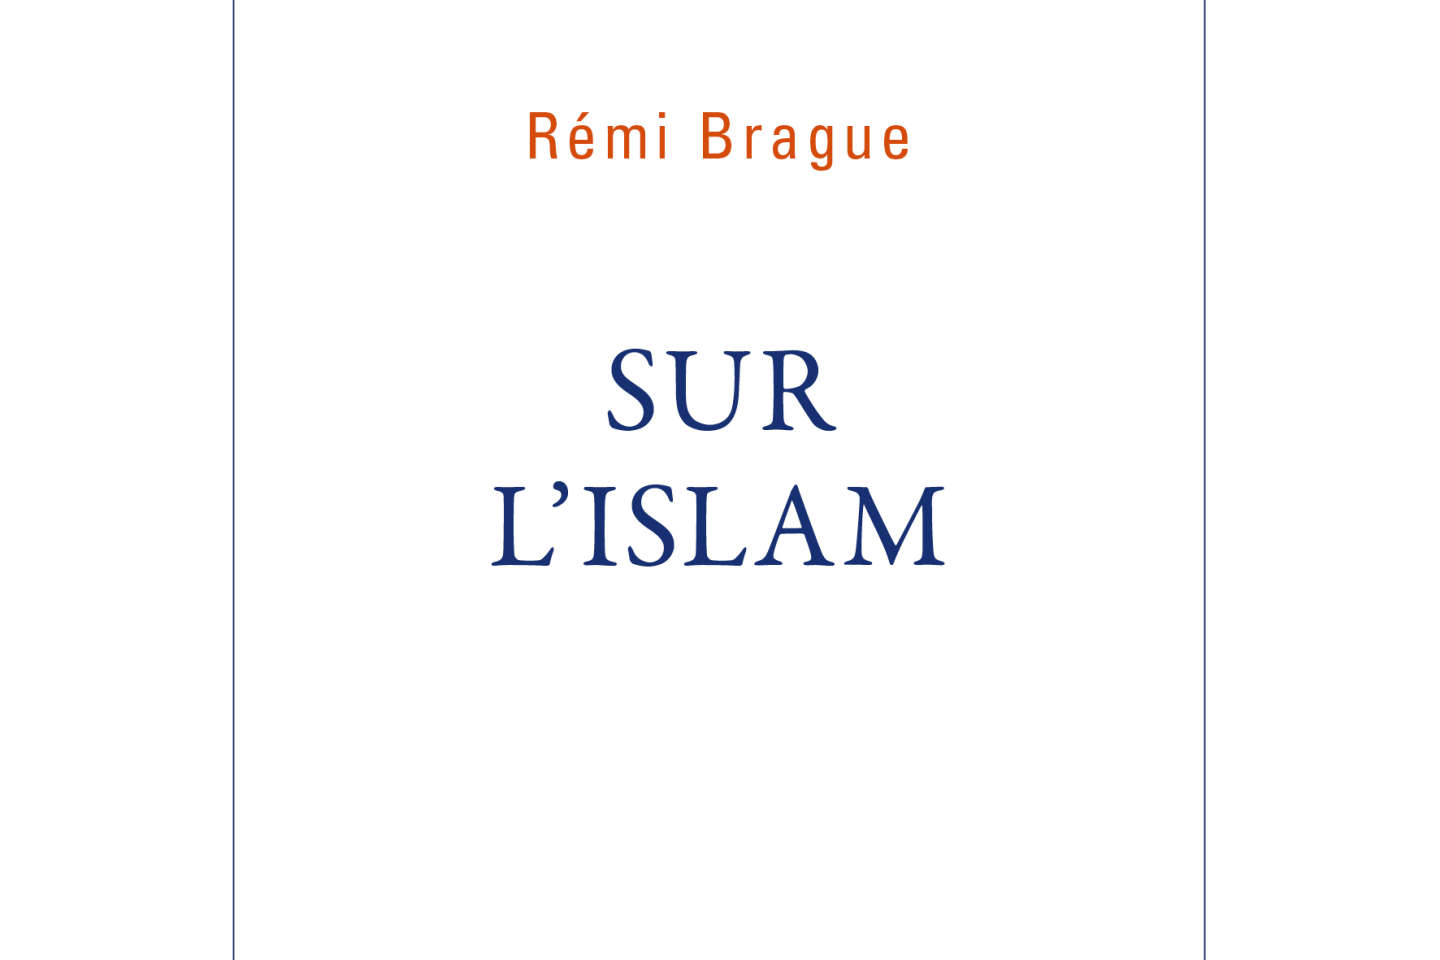 “On Islam”, a corseted vision of the Muslim tradition